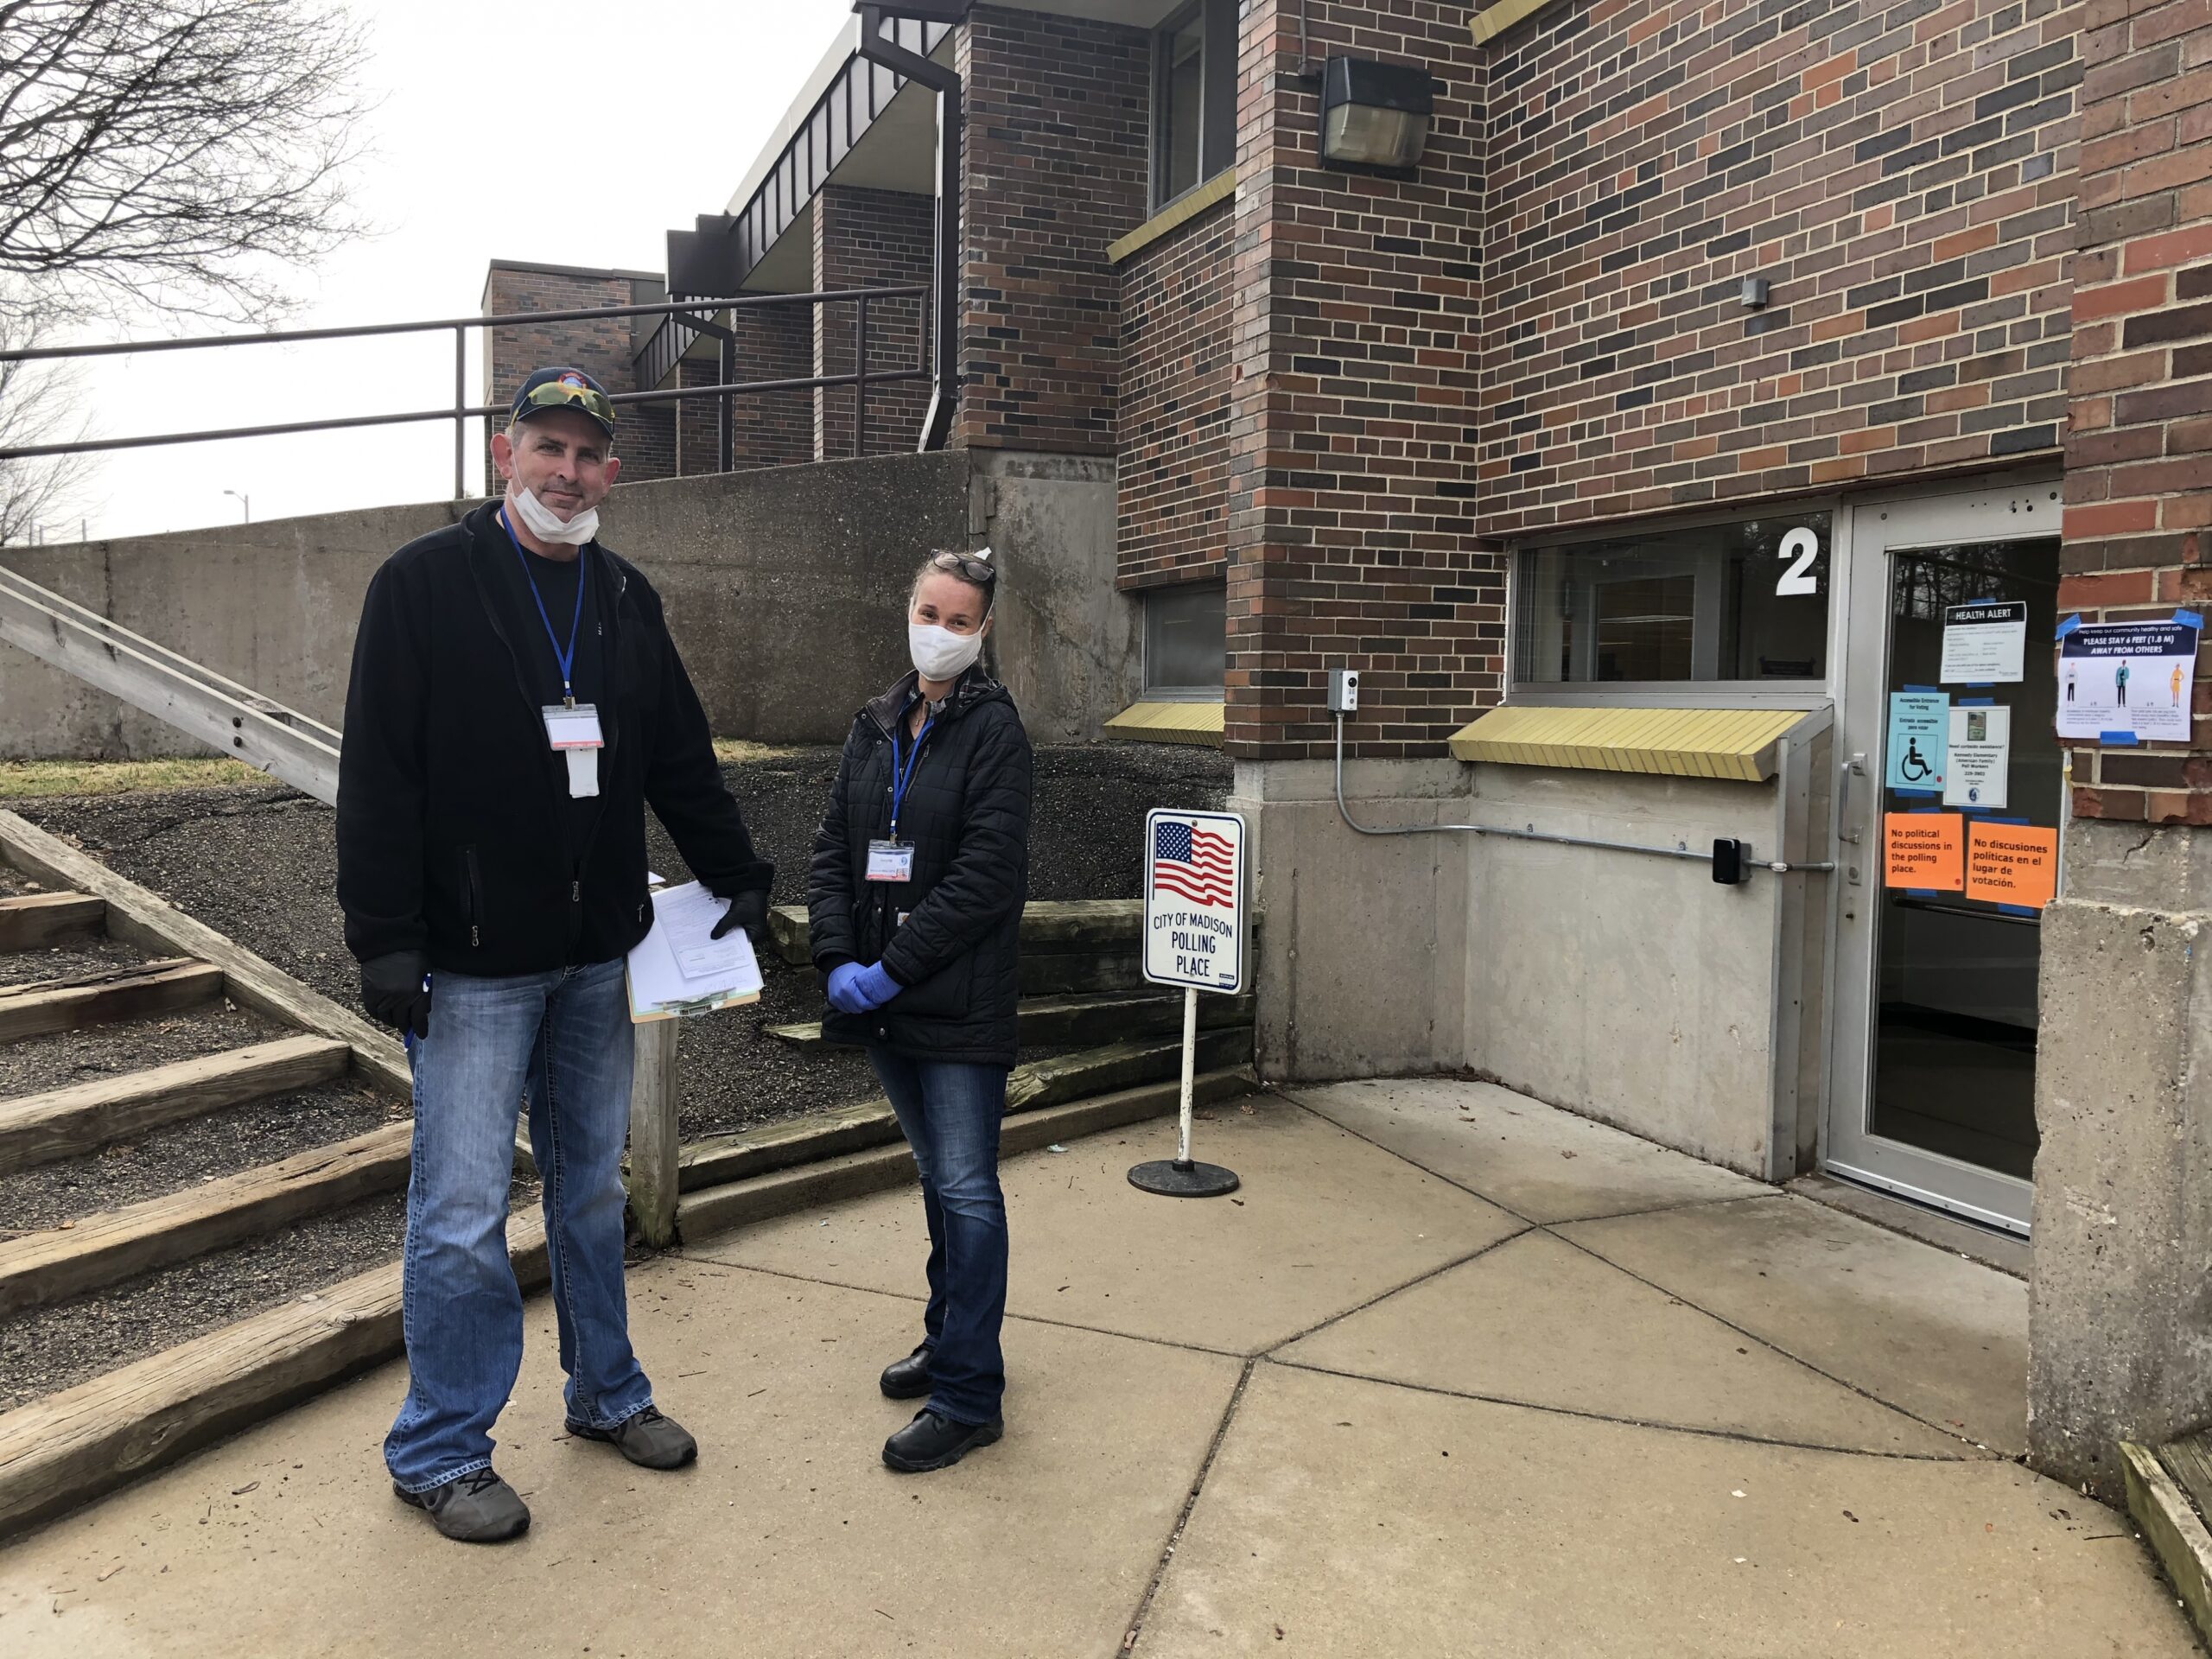 ‘It’s Surreal’: Local Wisconsin Officials Work To Keep Election Safe Amid COVID-19 Outbreak